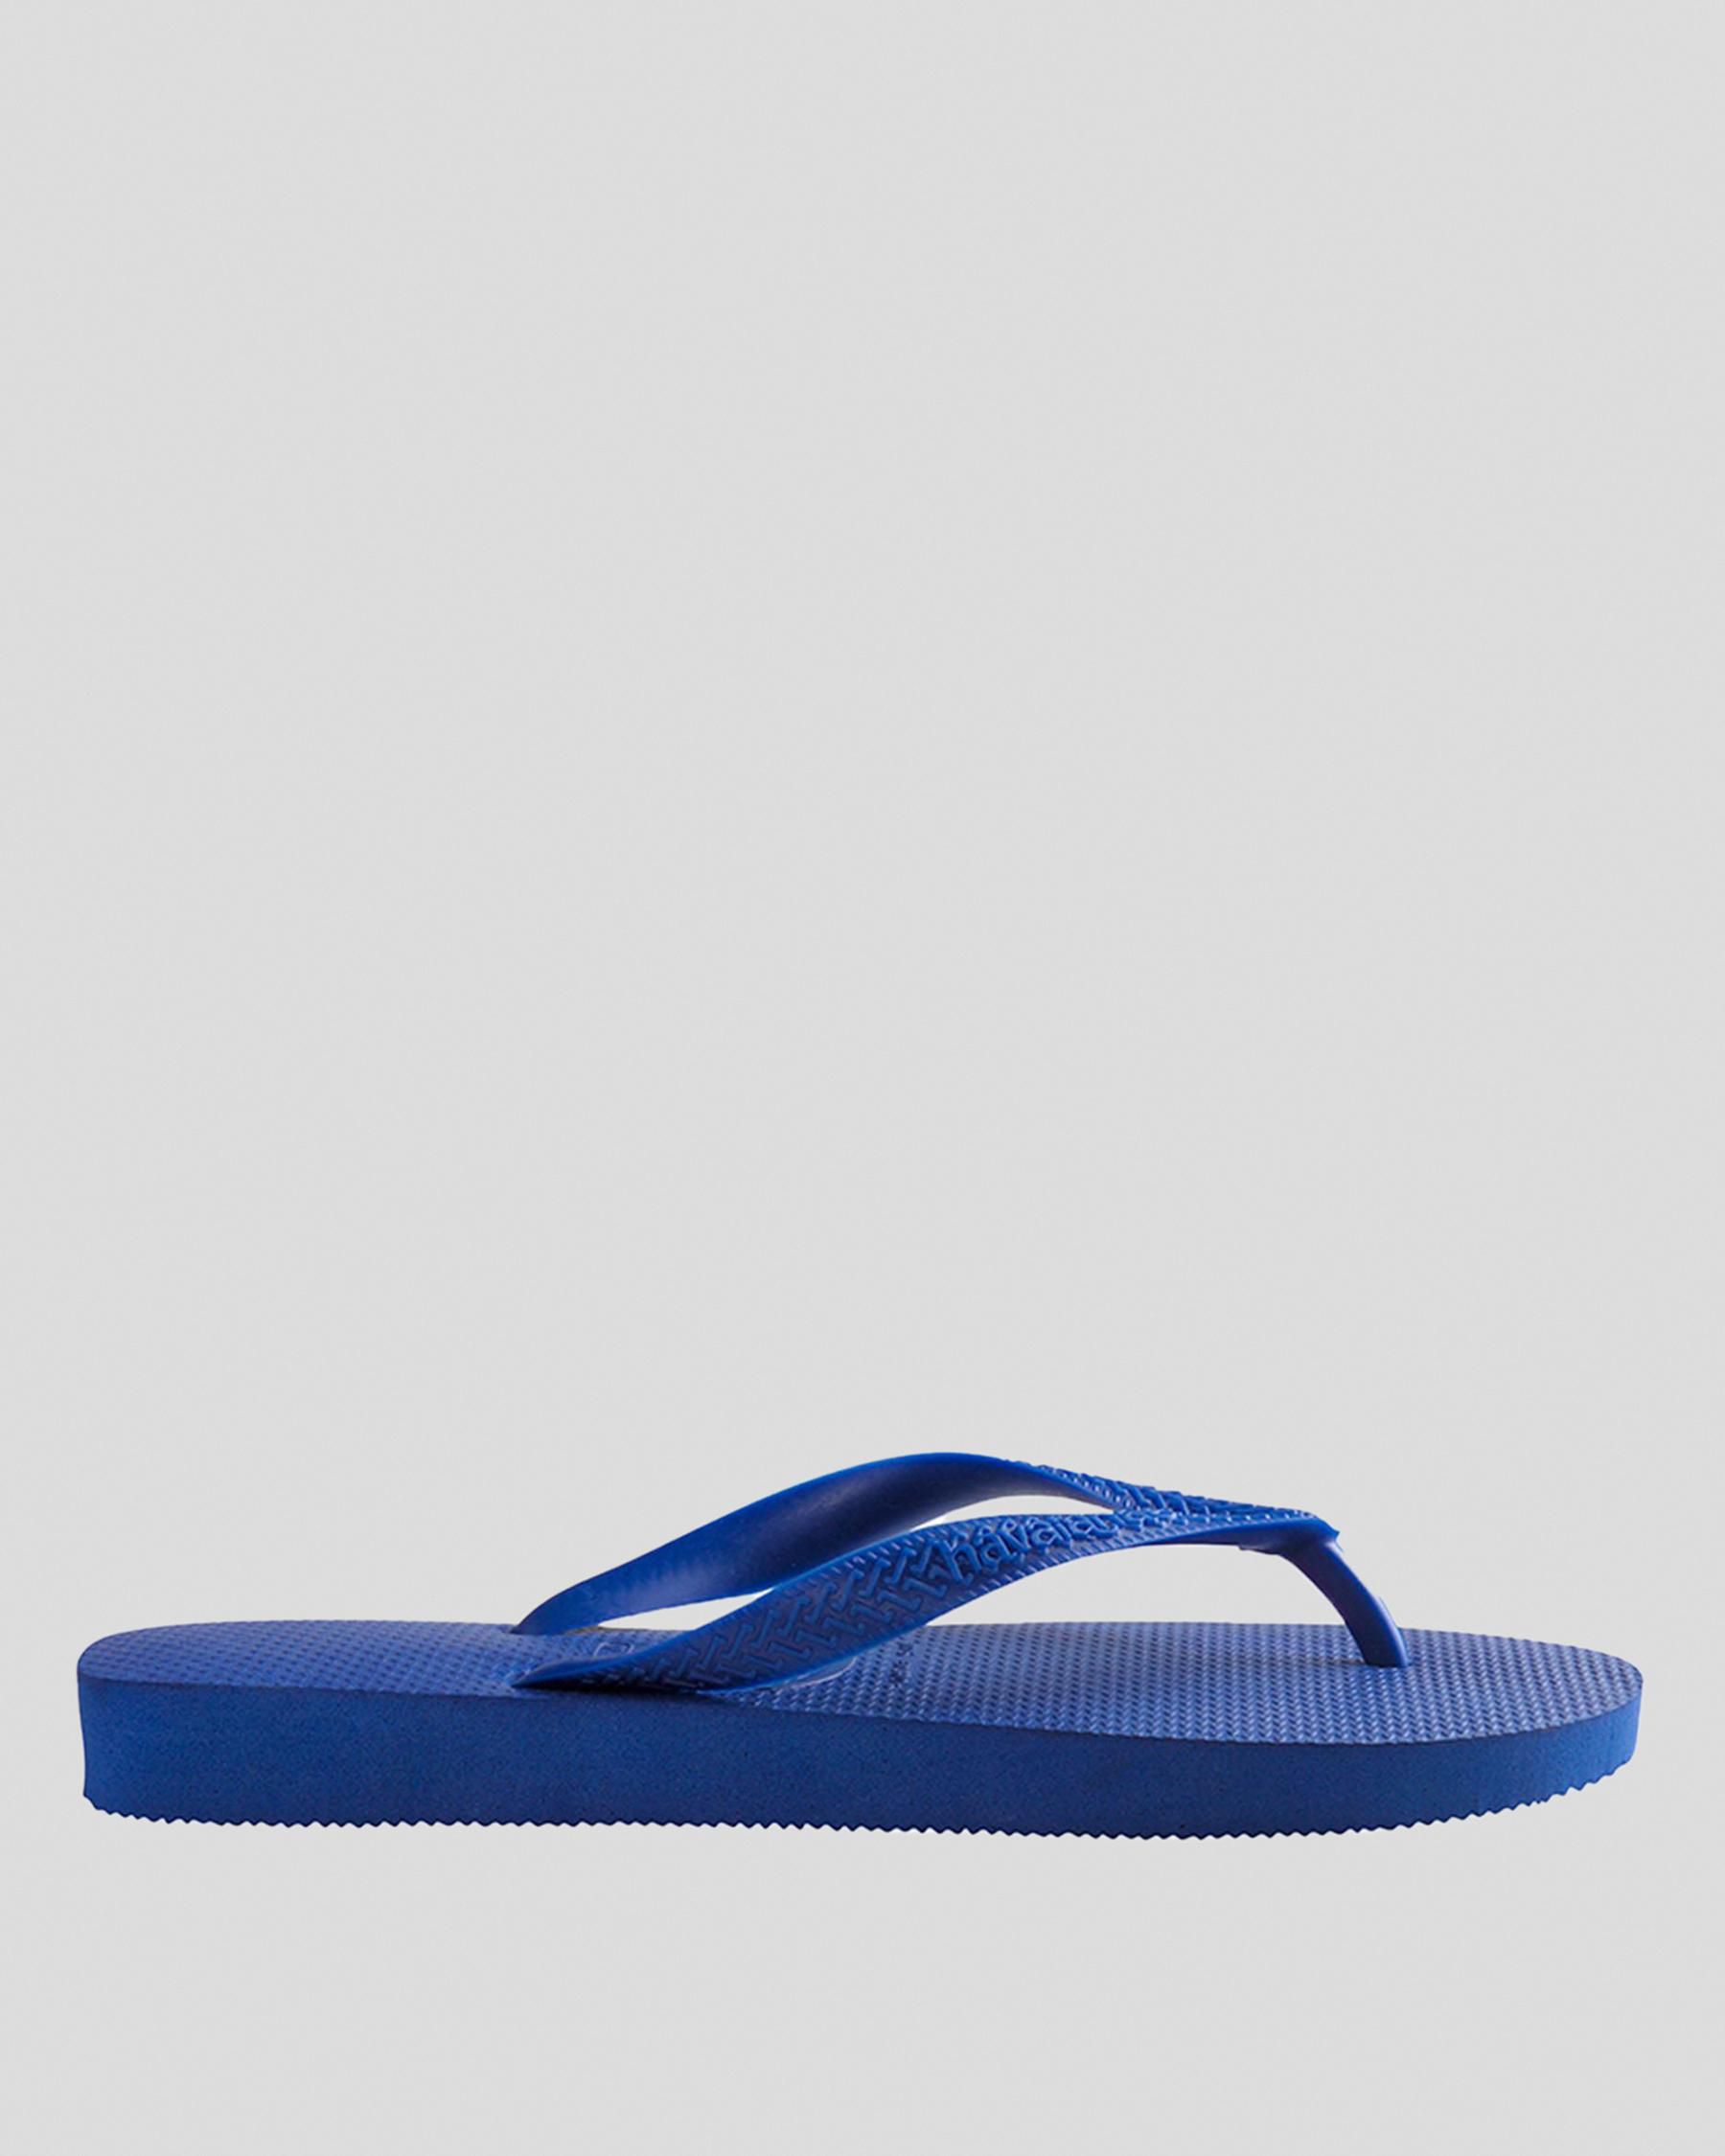 Shop Havaianas Top Thongs In Marine Blue - Fast Shipping & Easy Returns ...